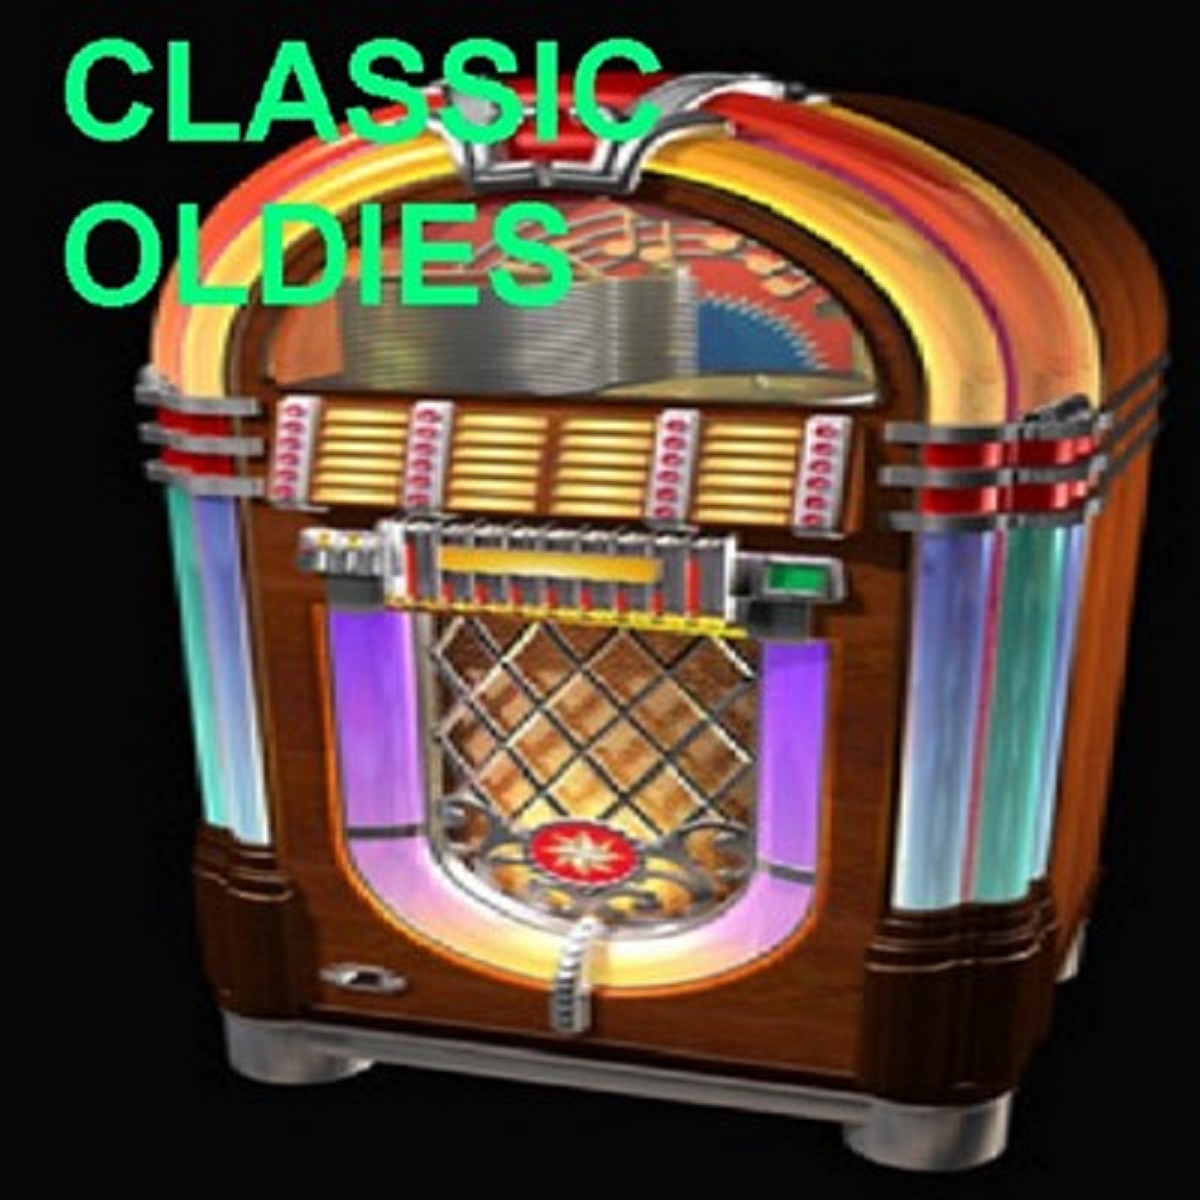 Art for the Best Music CLASSIC OLDIES by the Best Music CLASSIC OLDIES